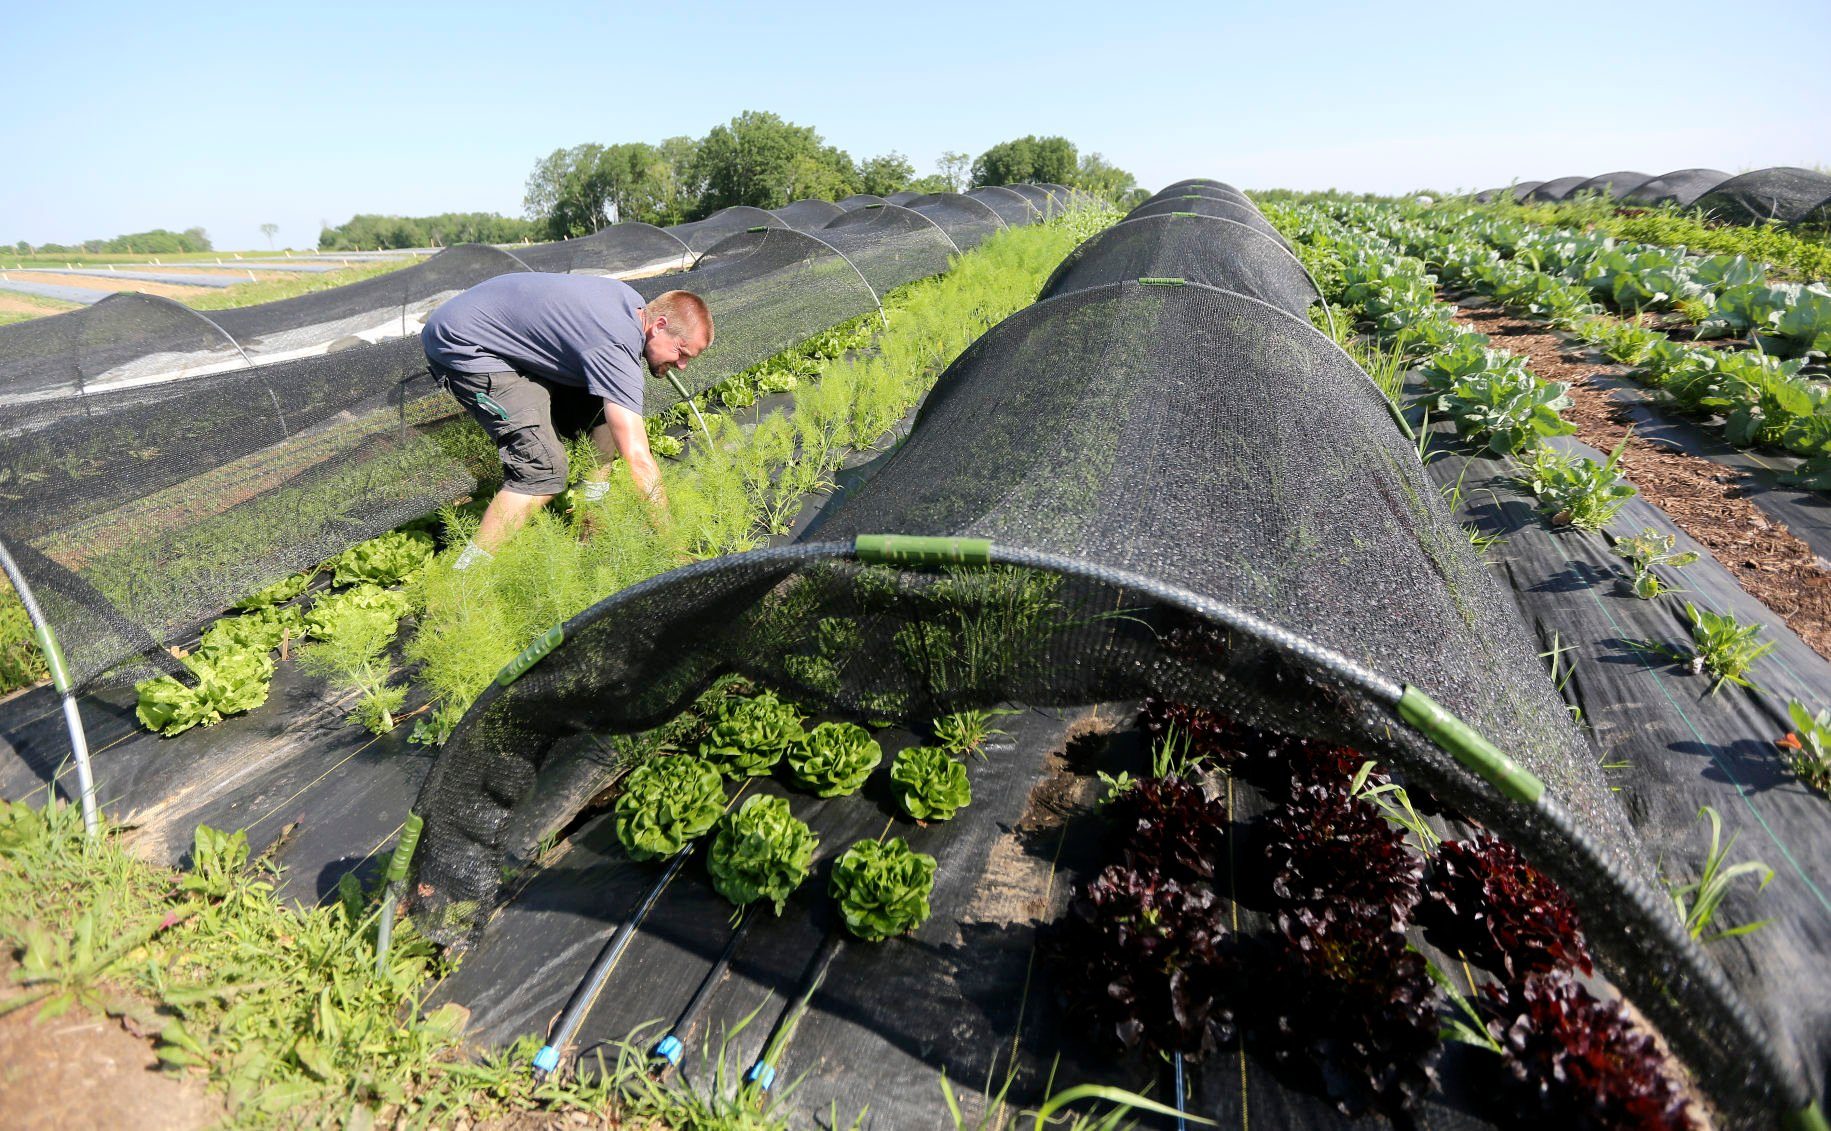 Andrew Phelps works in one of his many gardens on his family’s rural Guttenberg, Iowa, farm recently. The family grows many types of produce. The family sells produce and locally raised beef at several farmers markets in the area.    PHOTO CREDIT: Dave Kettering